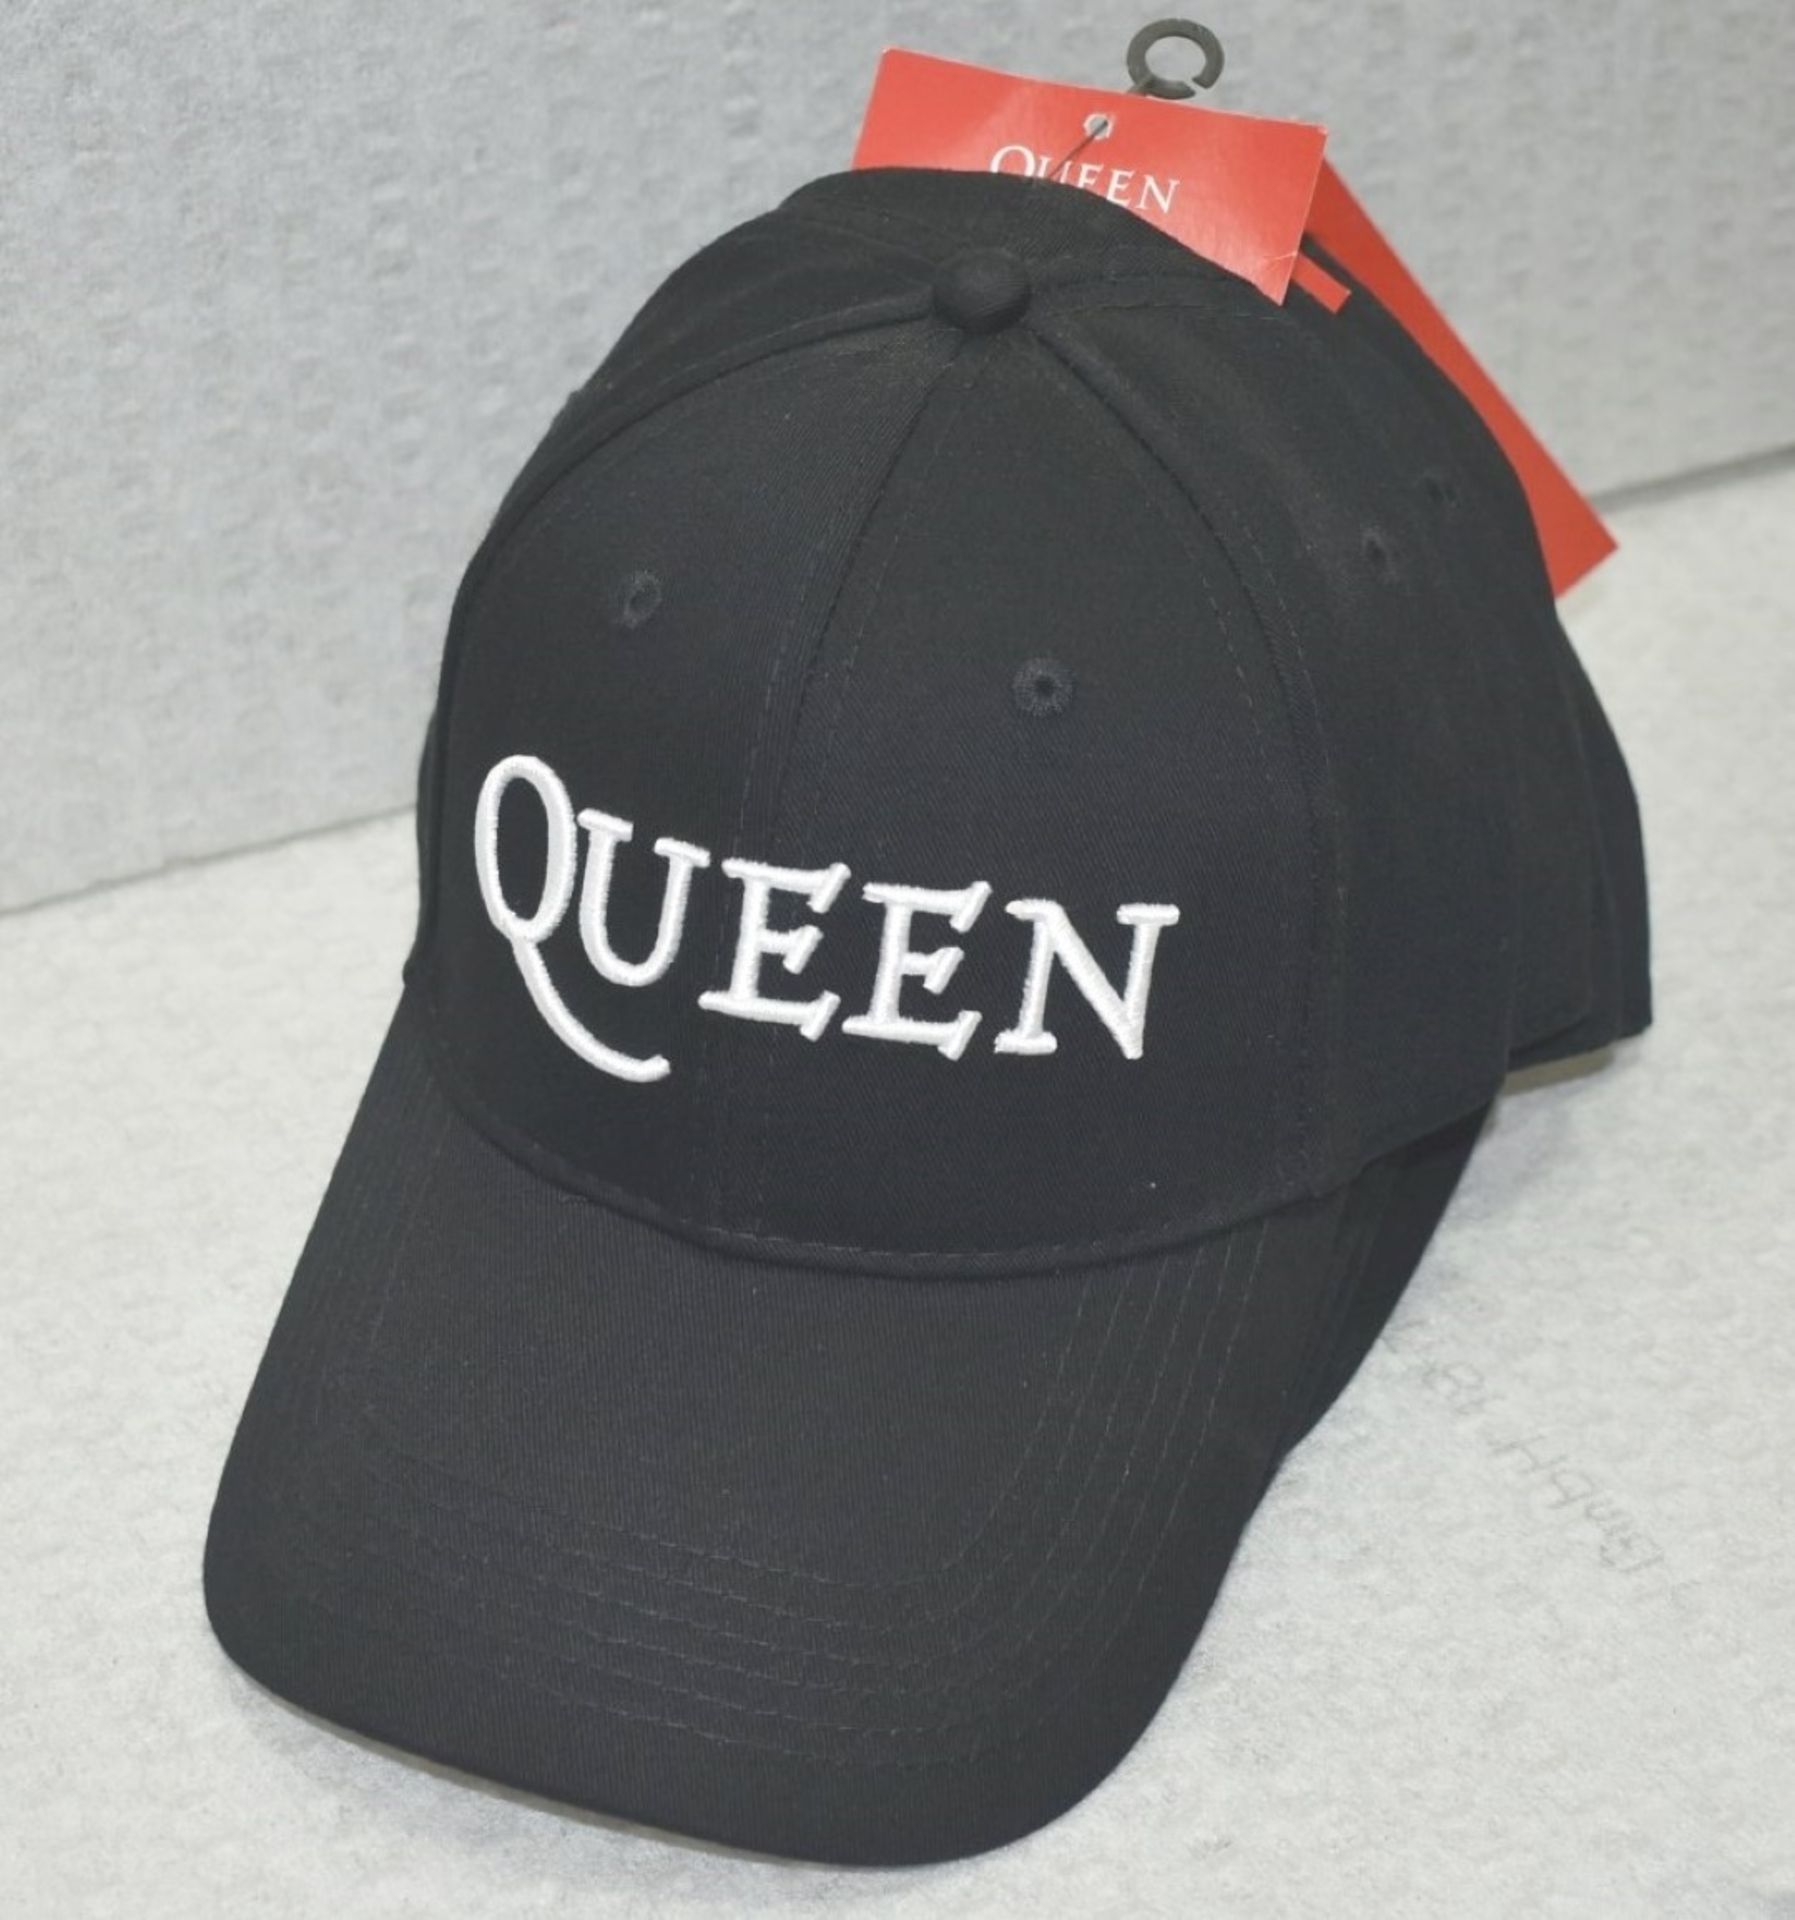 4 x Queen Baseball Caps - Colour: Black - One Size With Adjustable Strap - Officially Licensed